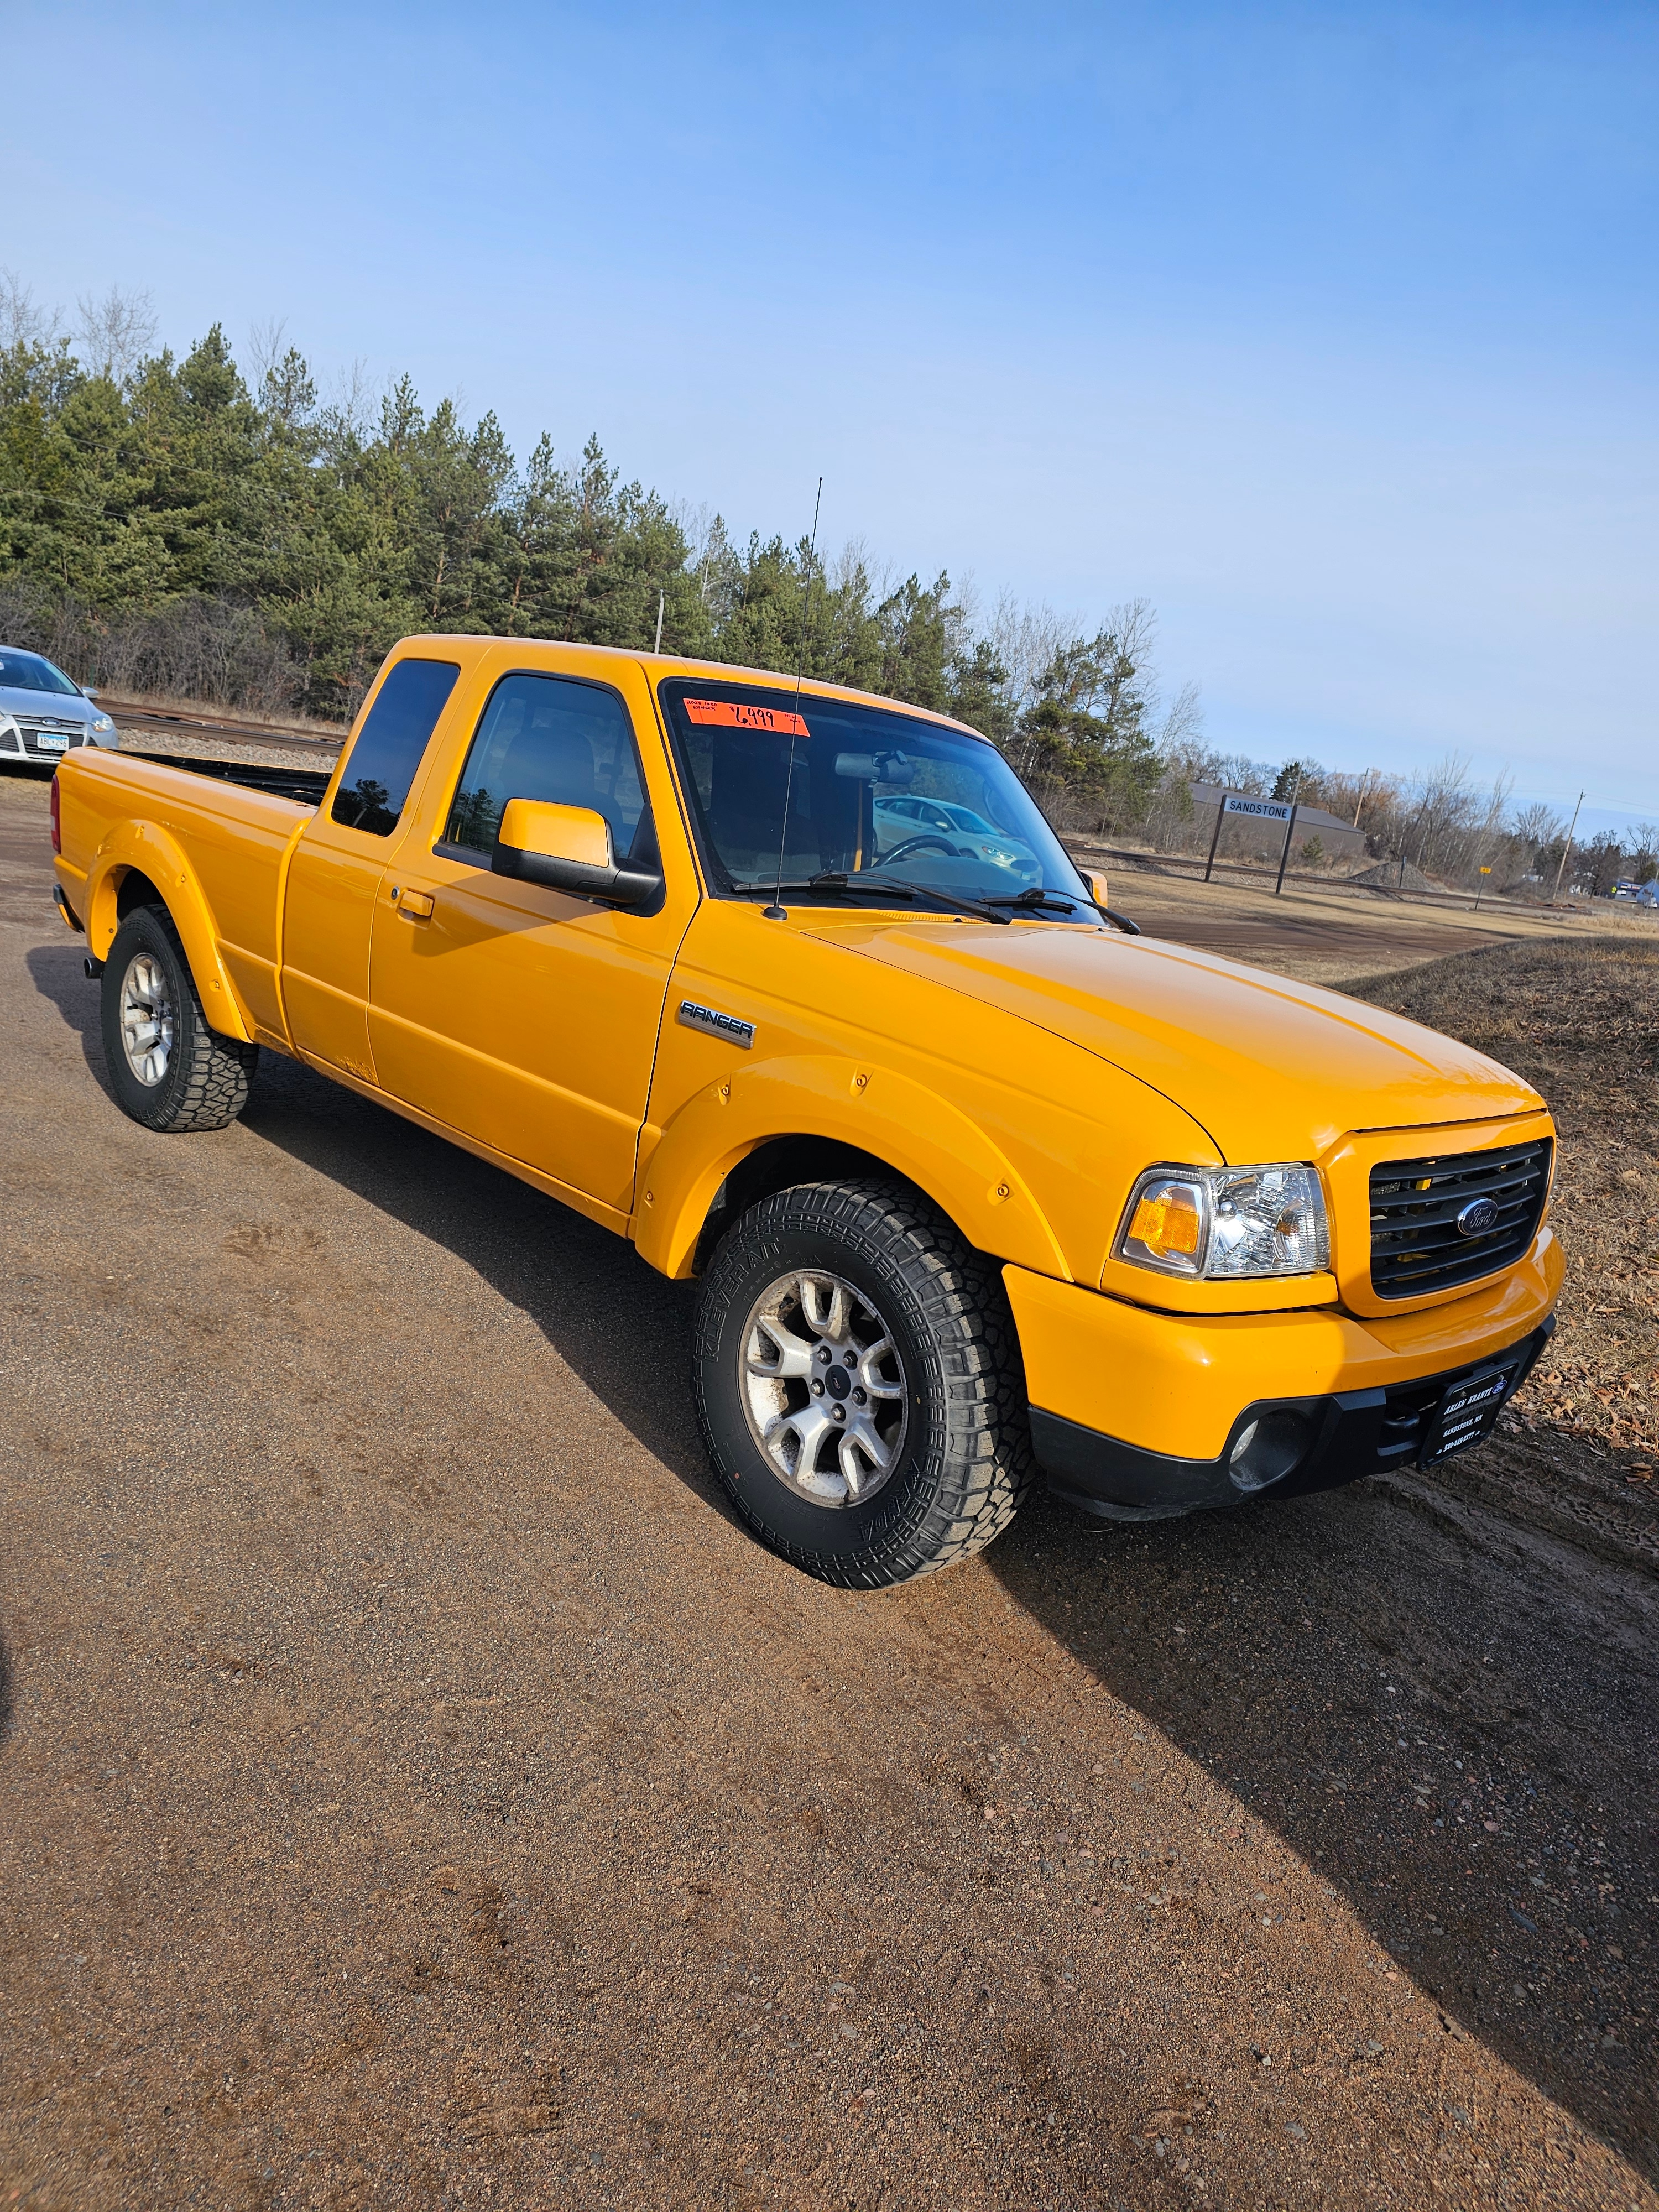 Used 2008 Ford Ranger Sport with VIN 1FTZR45E08PA13911 for sale in Sandstone, Minnesota